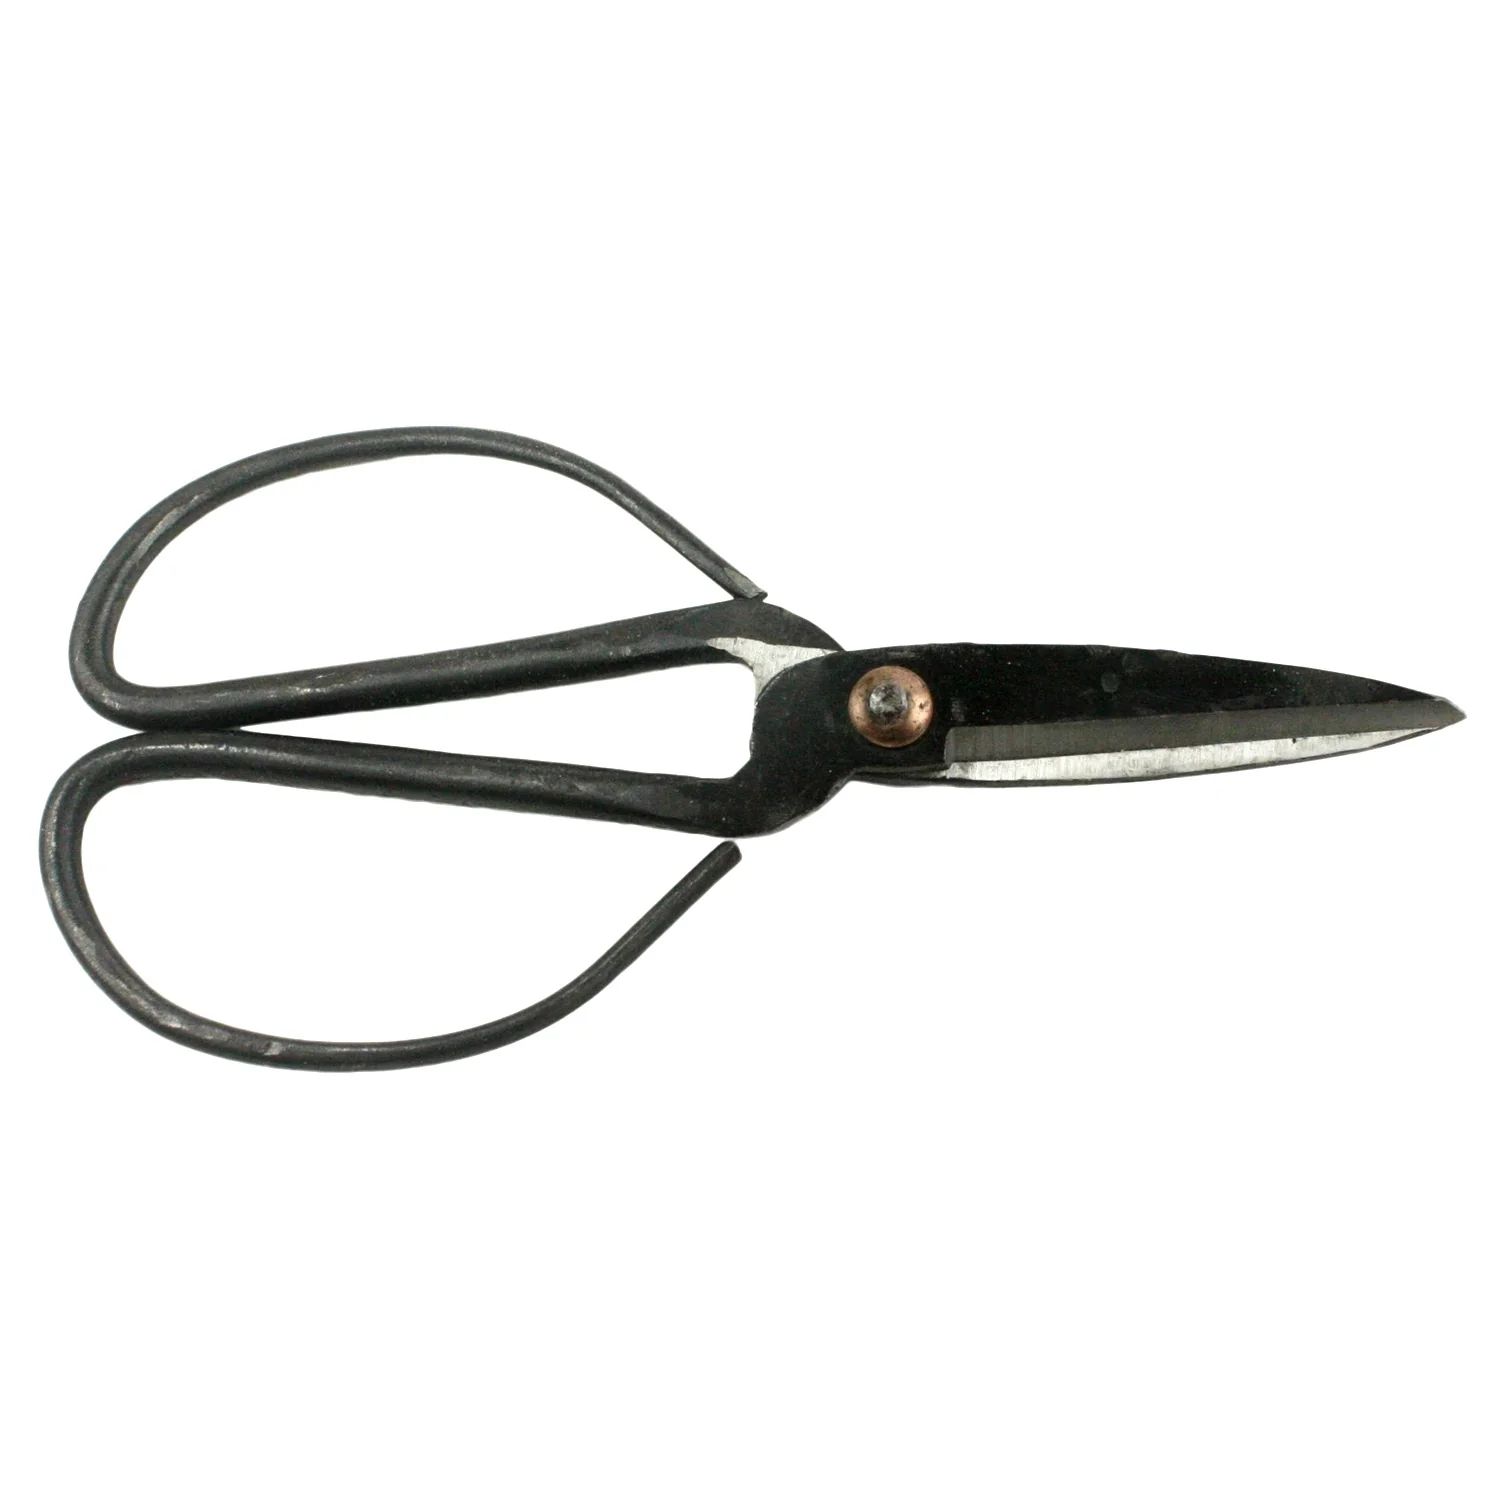 Forged Iron Shears | Foundation Goods